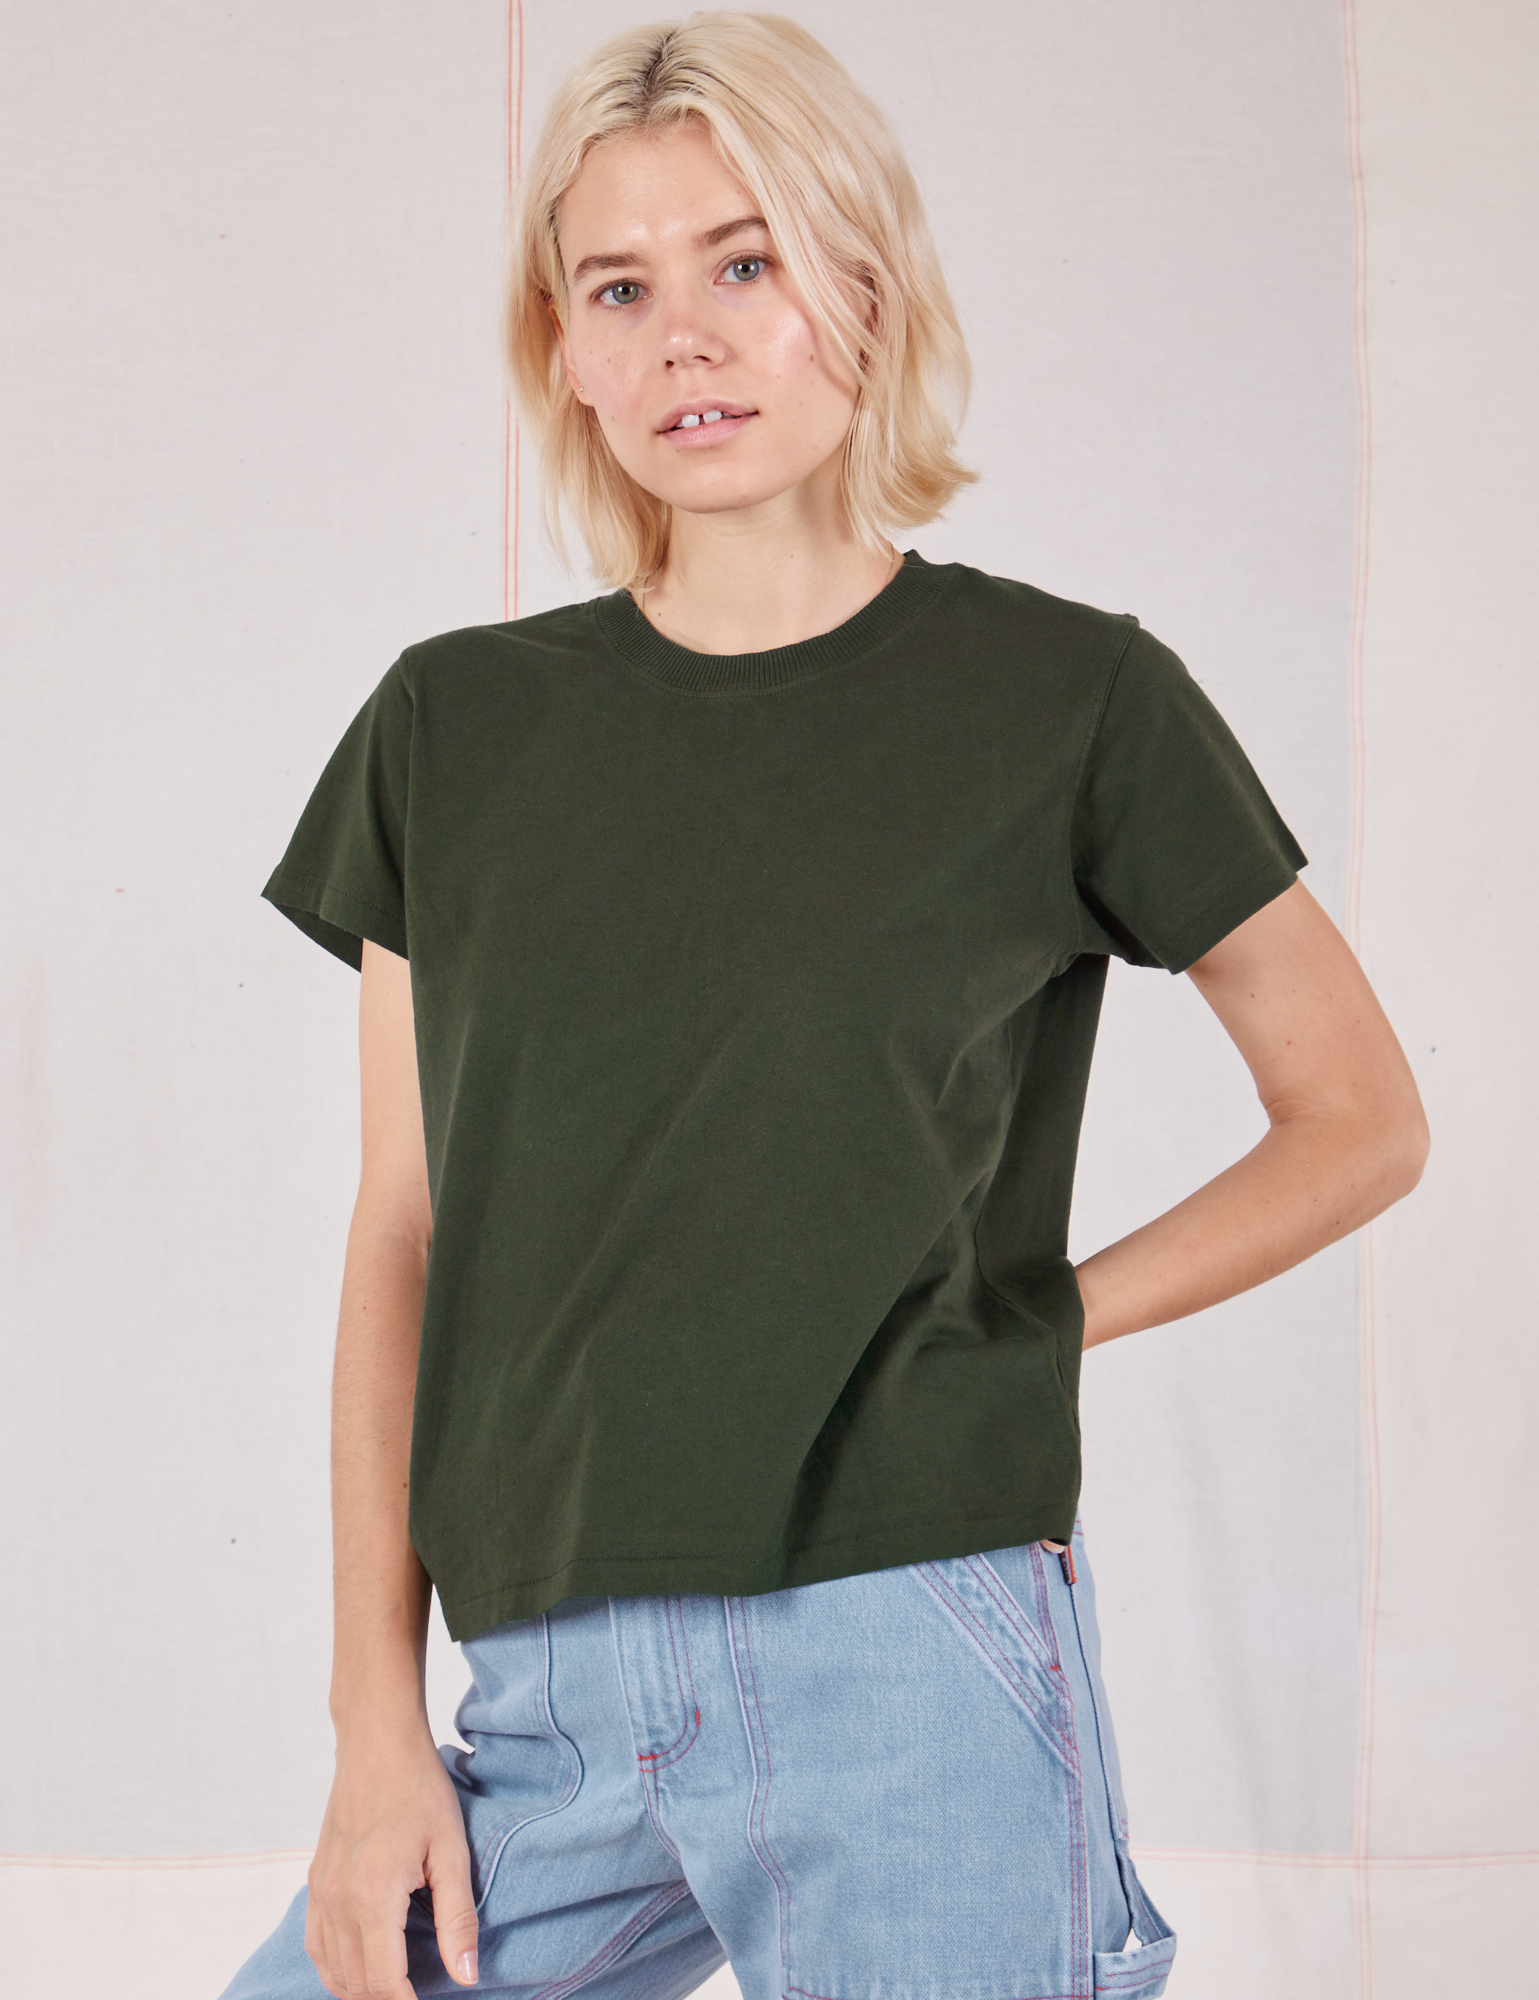 Madeline is 5&#39;9&quot; and wearing P Organic Vintage Tee in Swamp Green